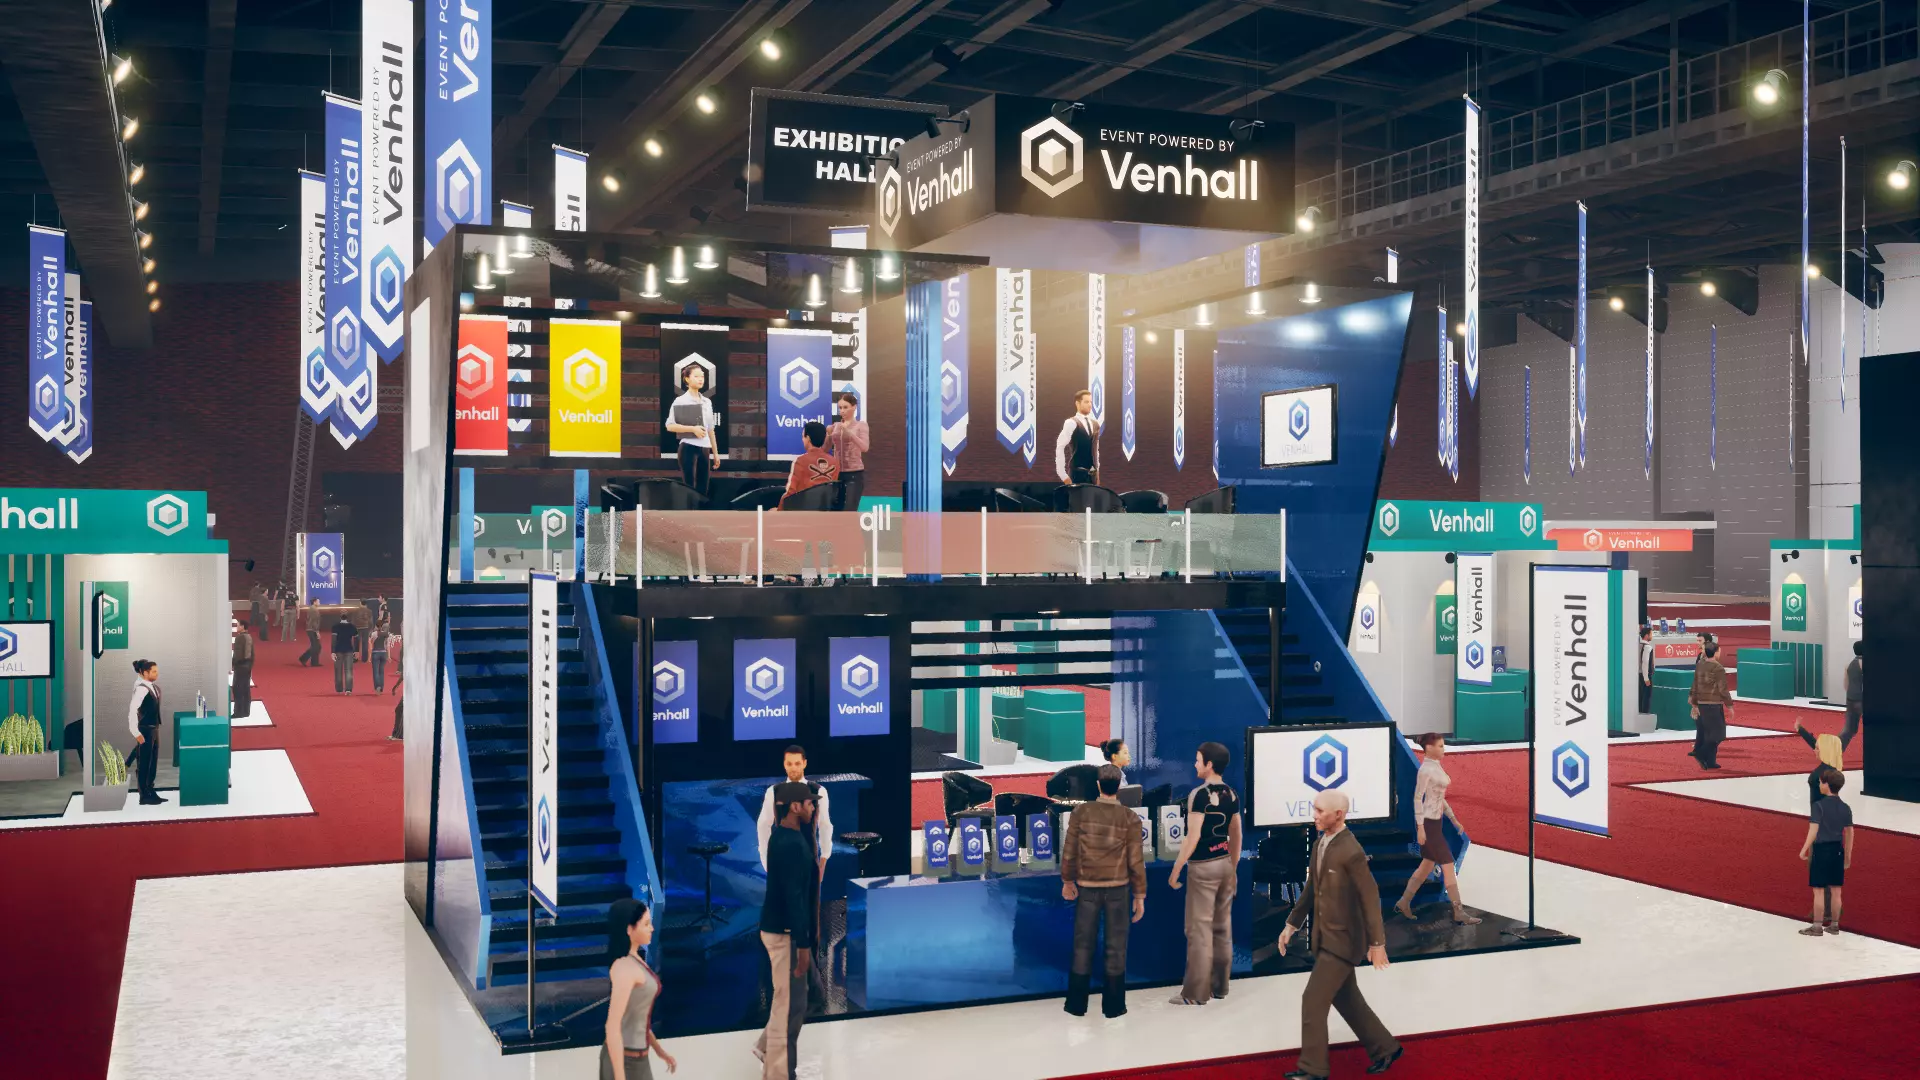 venhall interactive 3d virtual booth in virtual event venue exhibition hall for tradeshow and expo